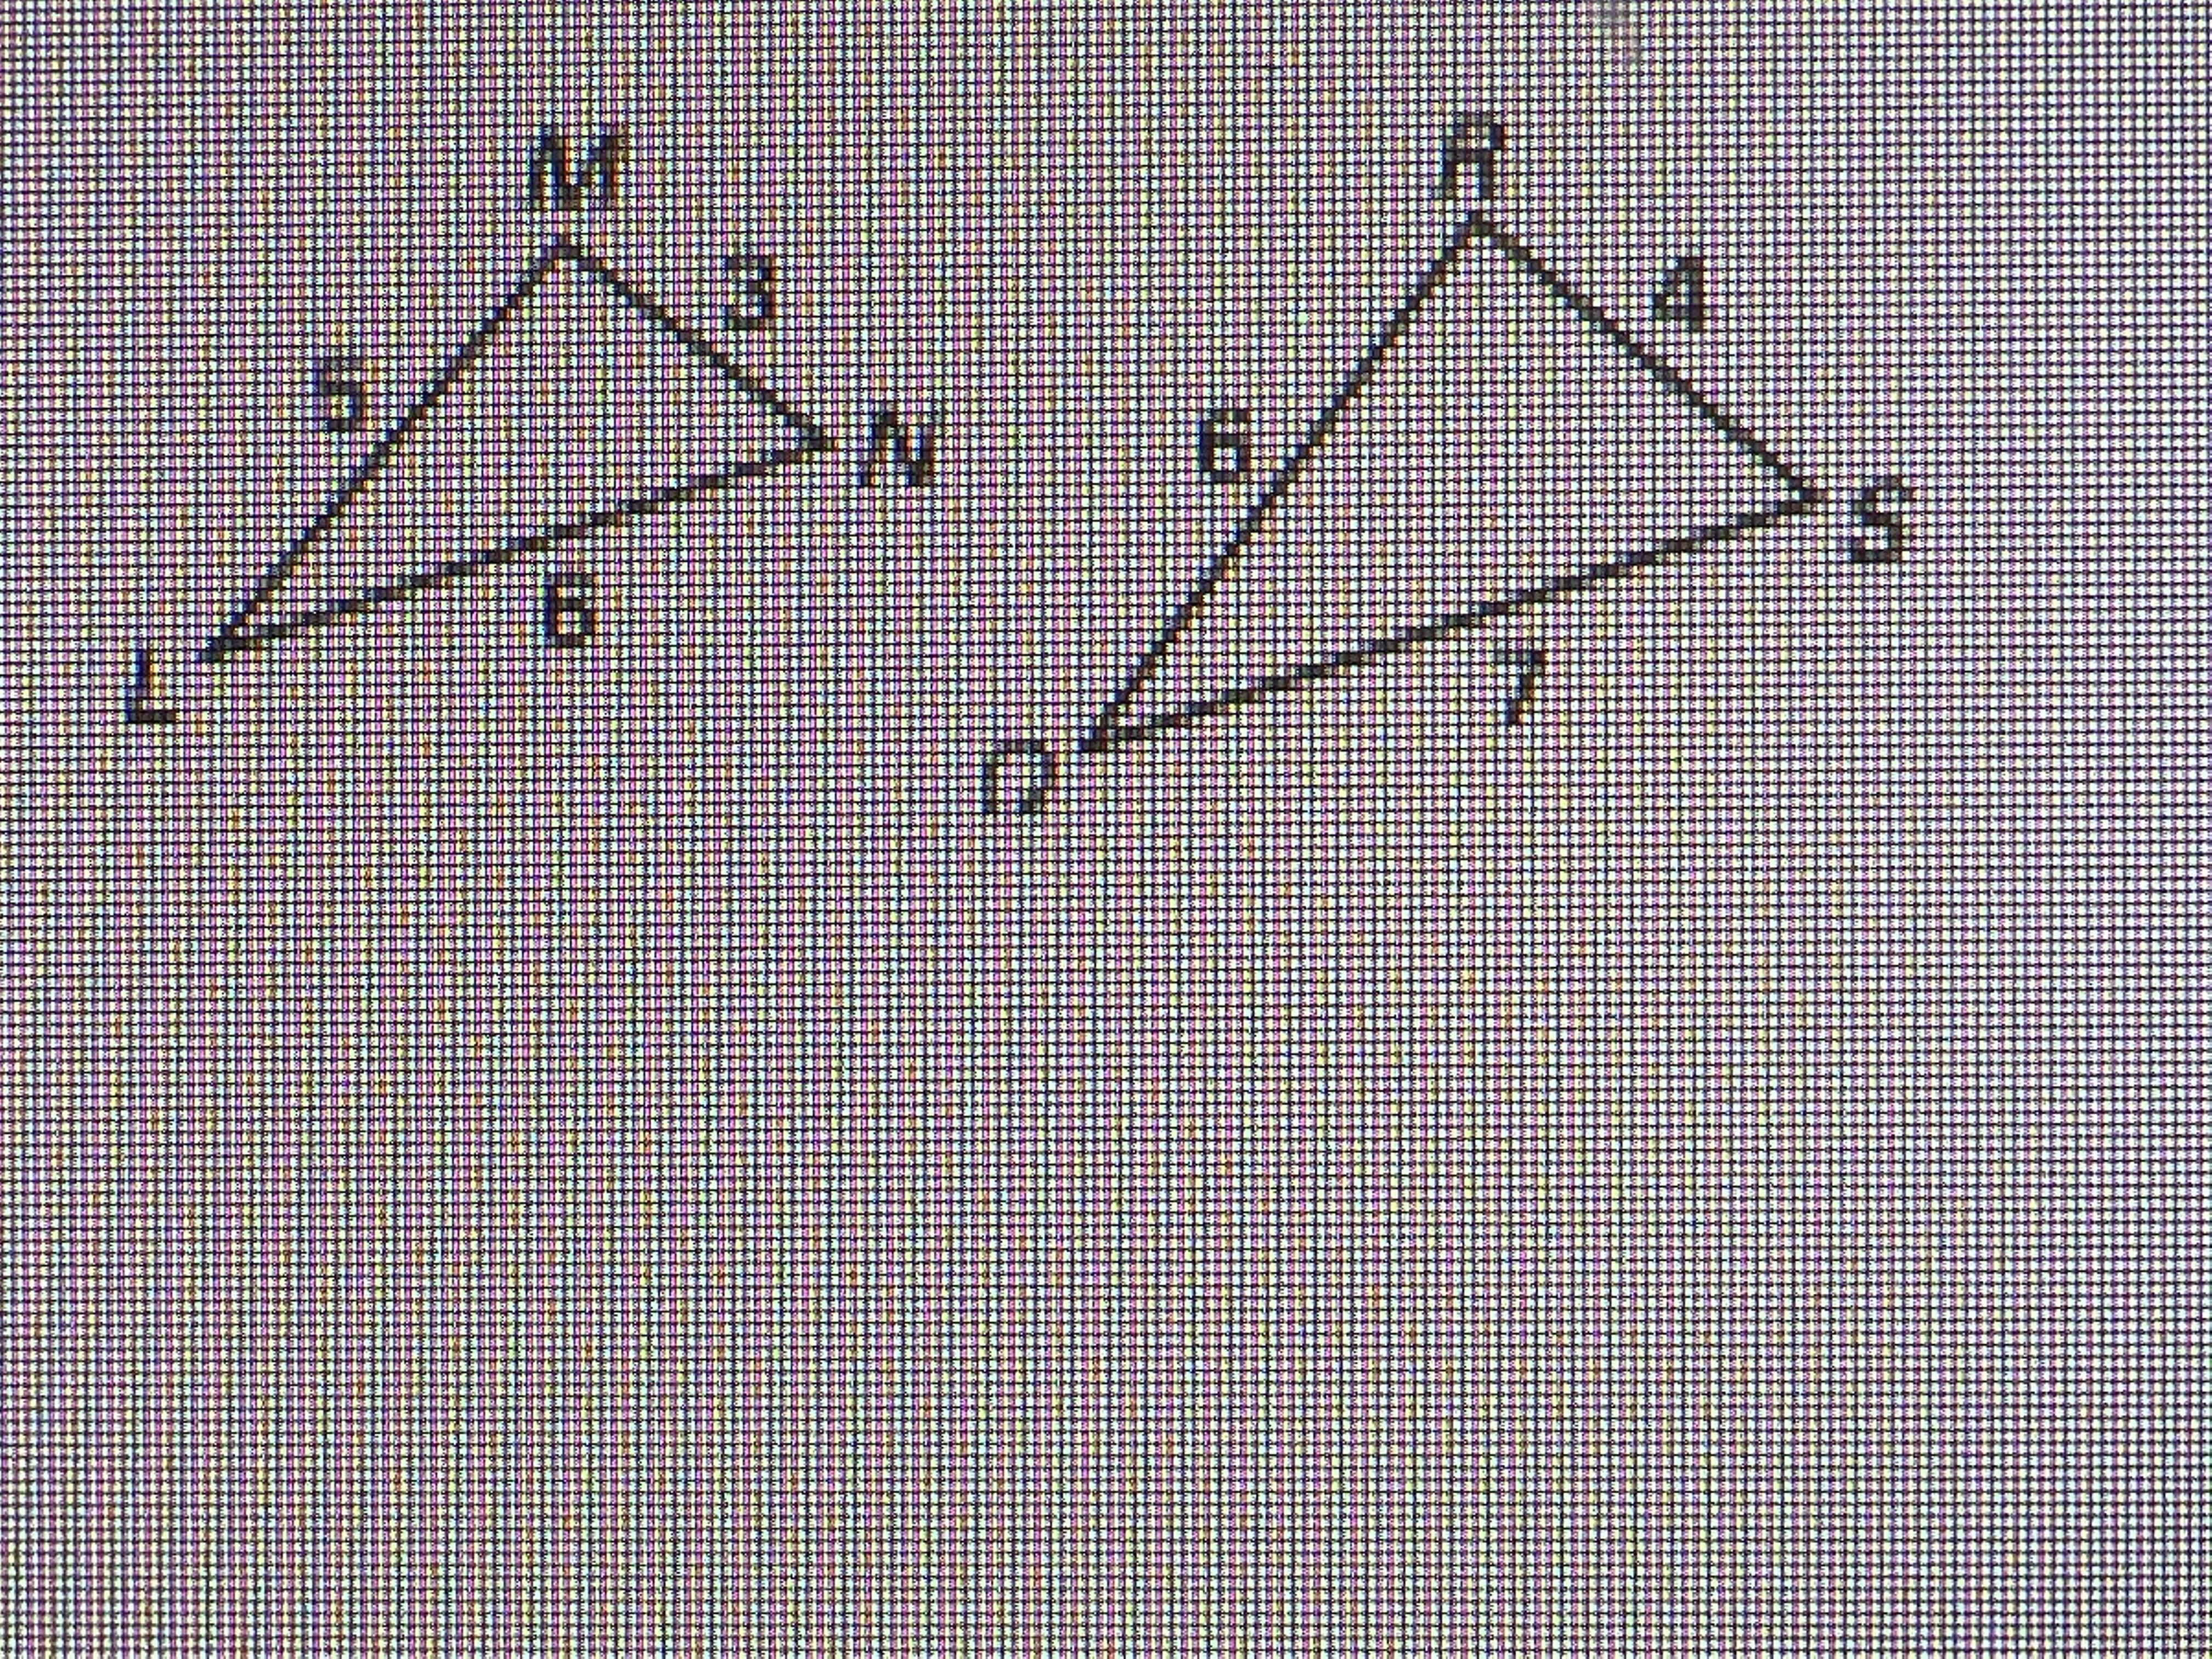 Are The Triangles Similar, If So Write How You Know.